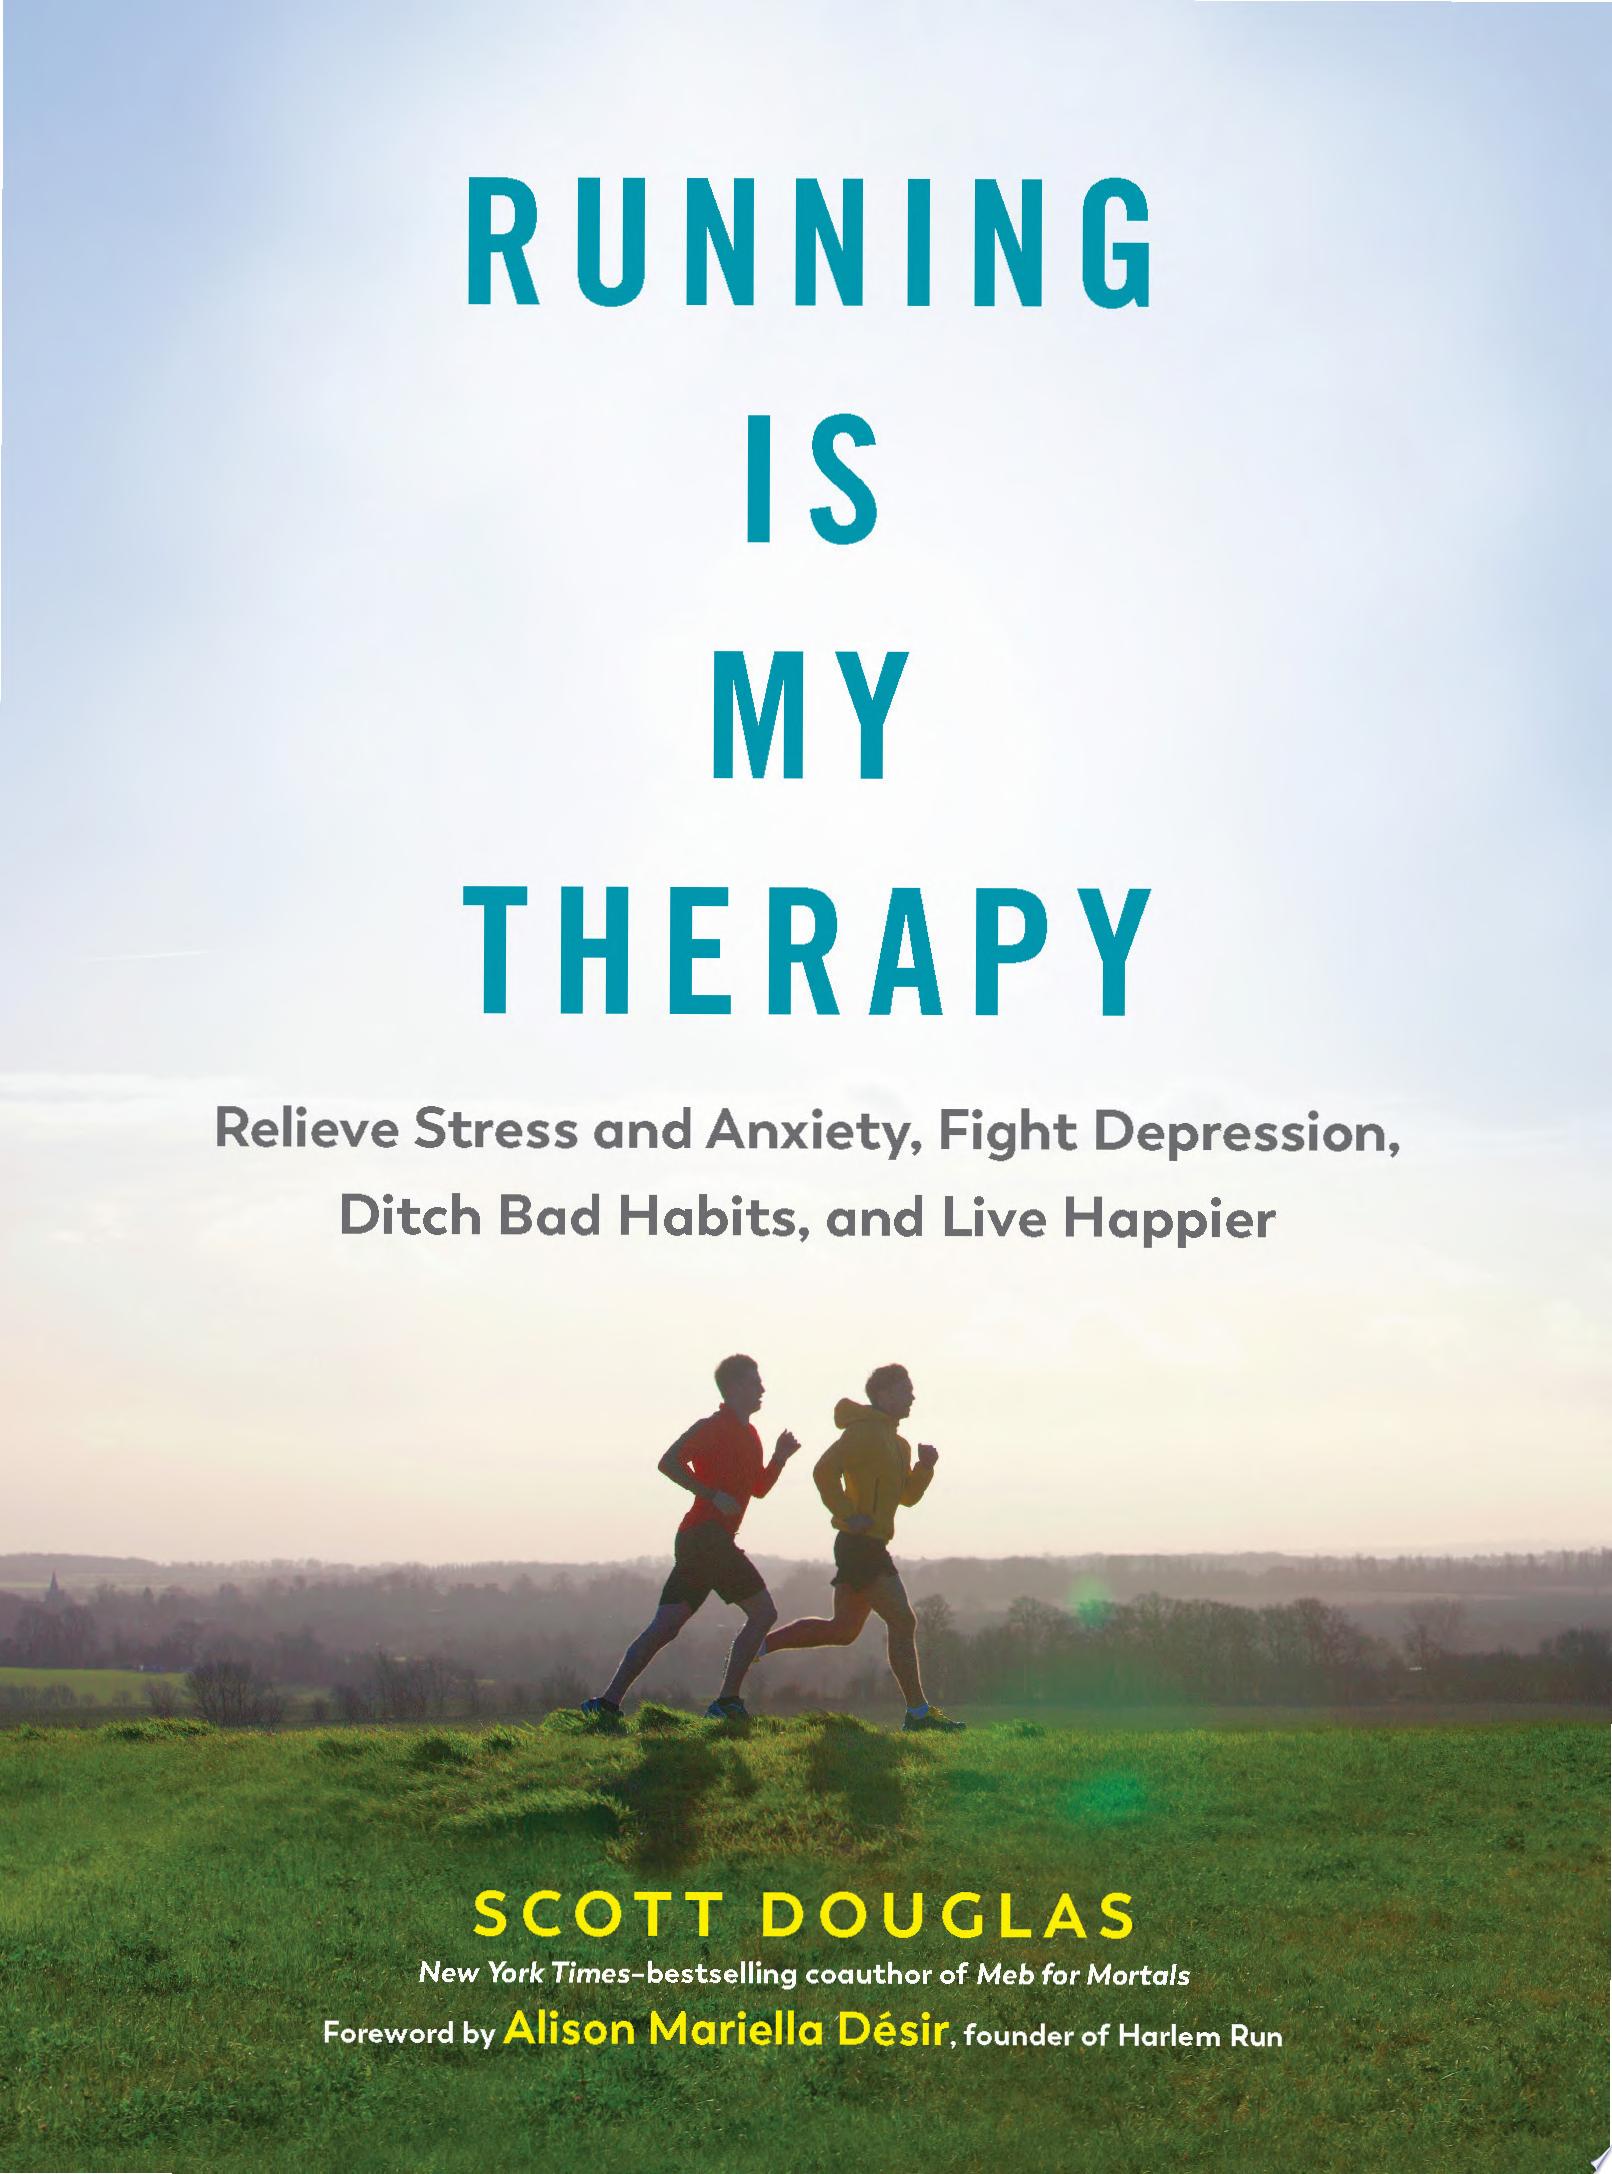 Image for "Running Is My Therapy"